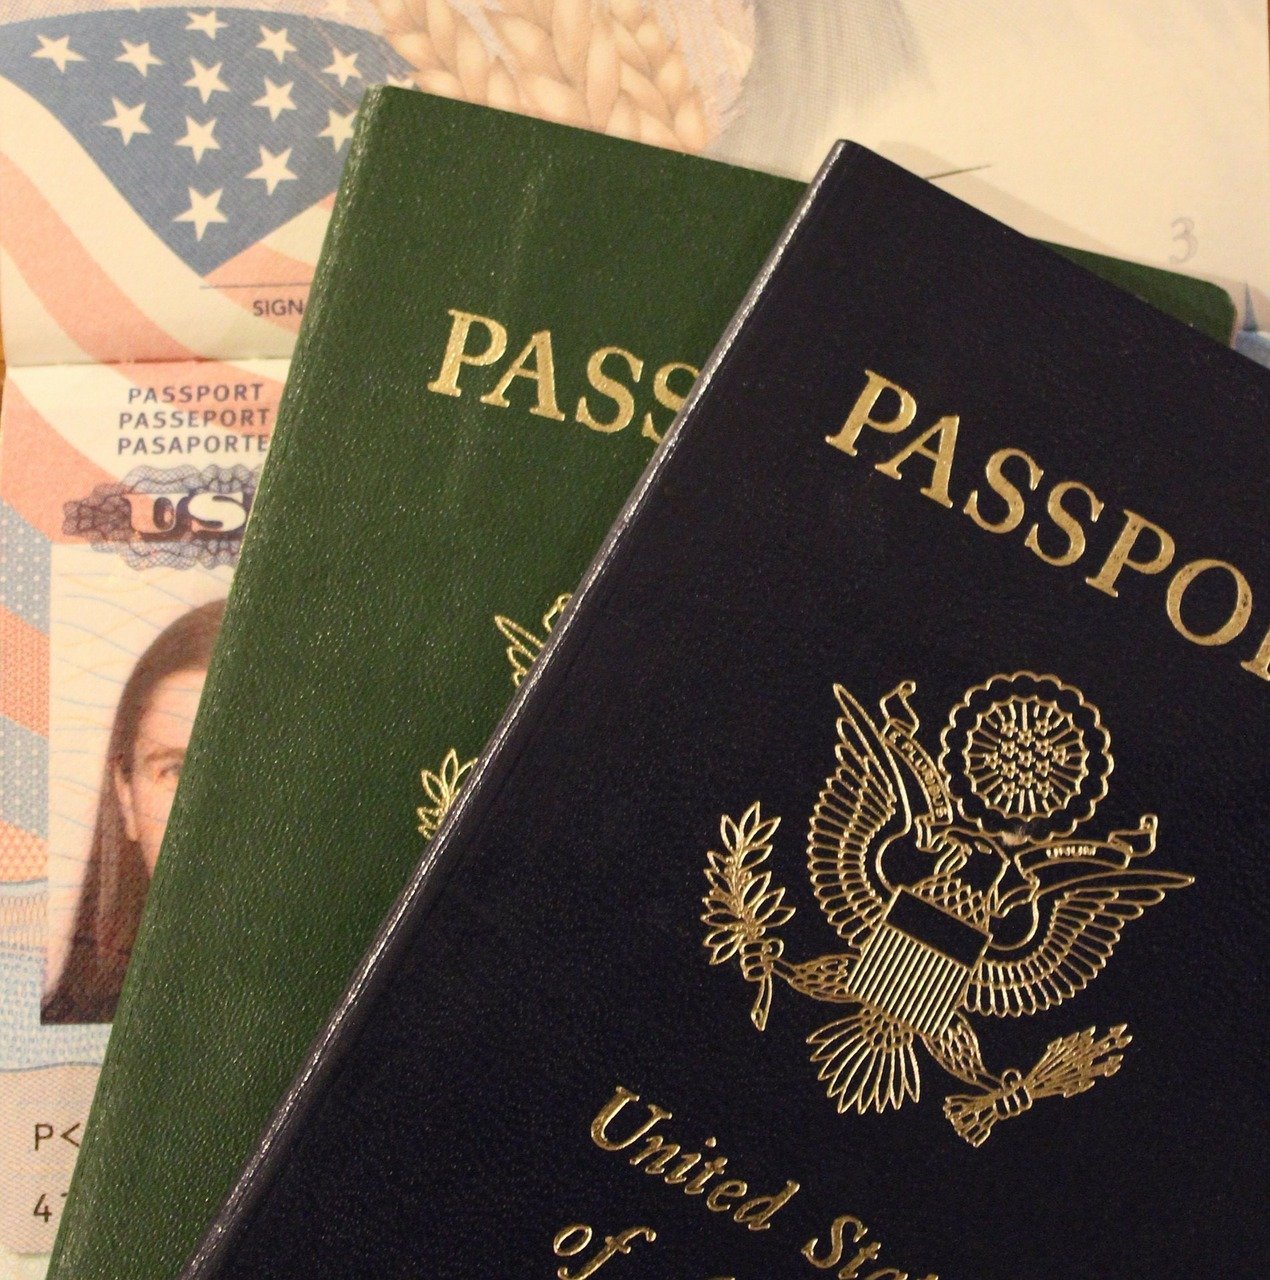 No Entry: United States Passport for traveling entry and documentation purpose